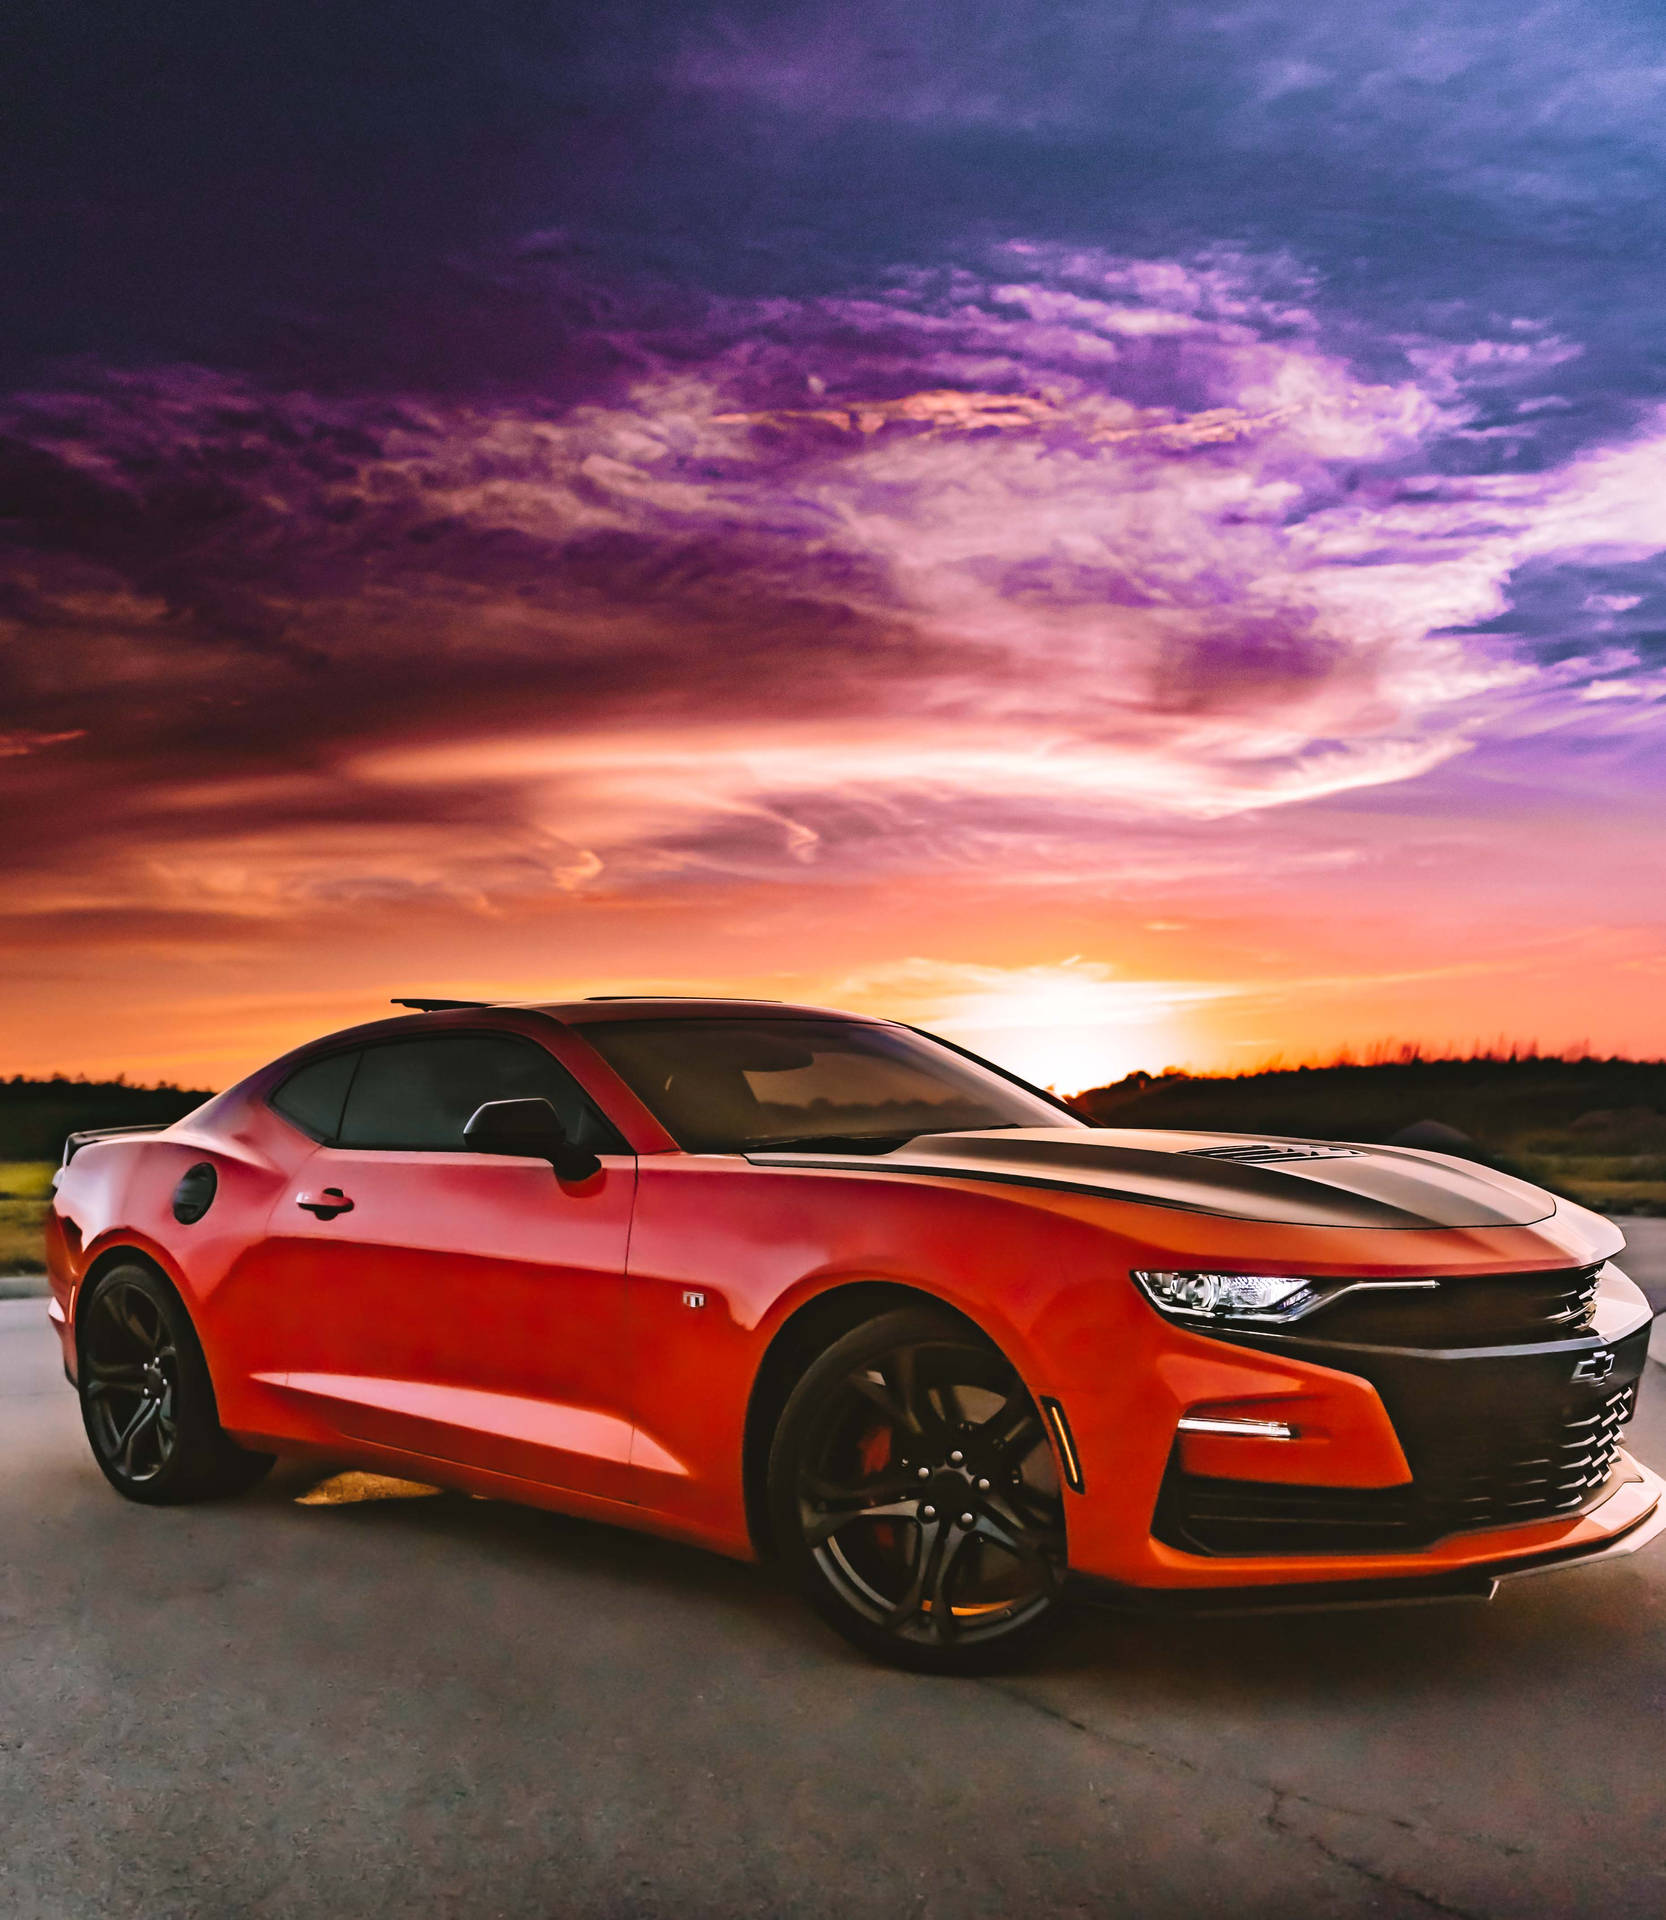 Chevrolet Car With Sunset Background